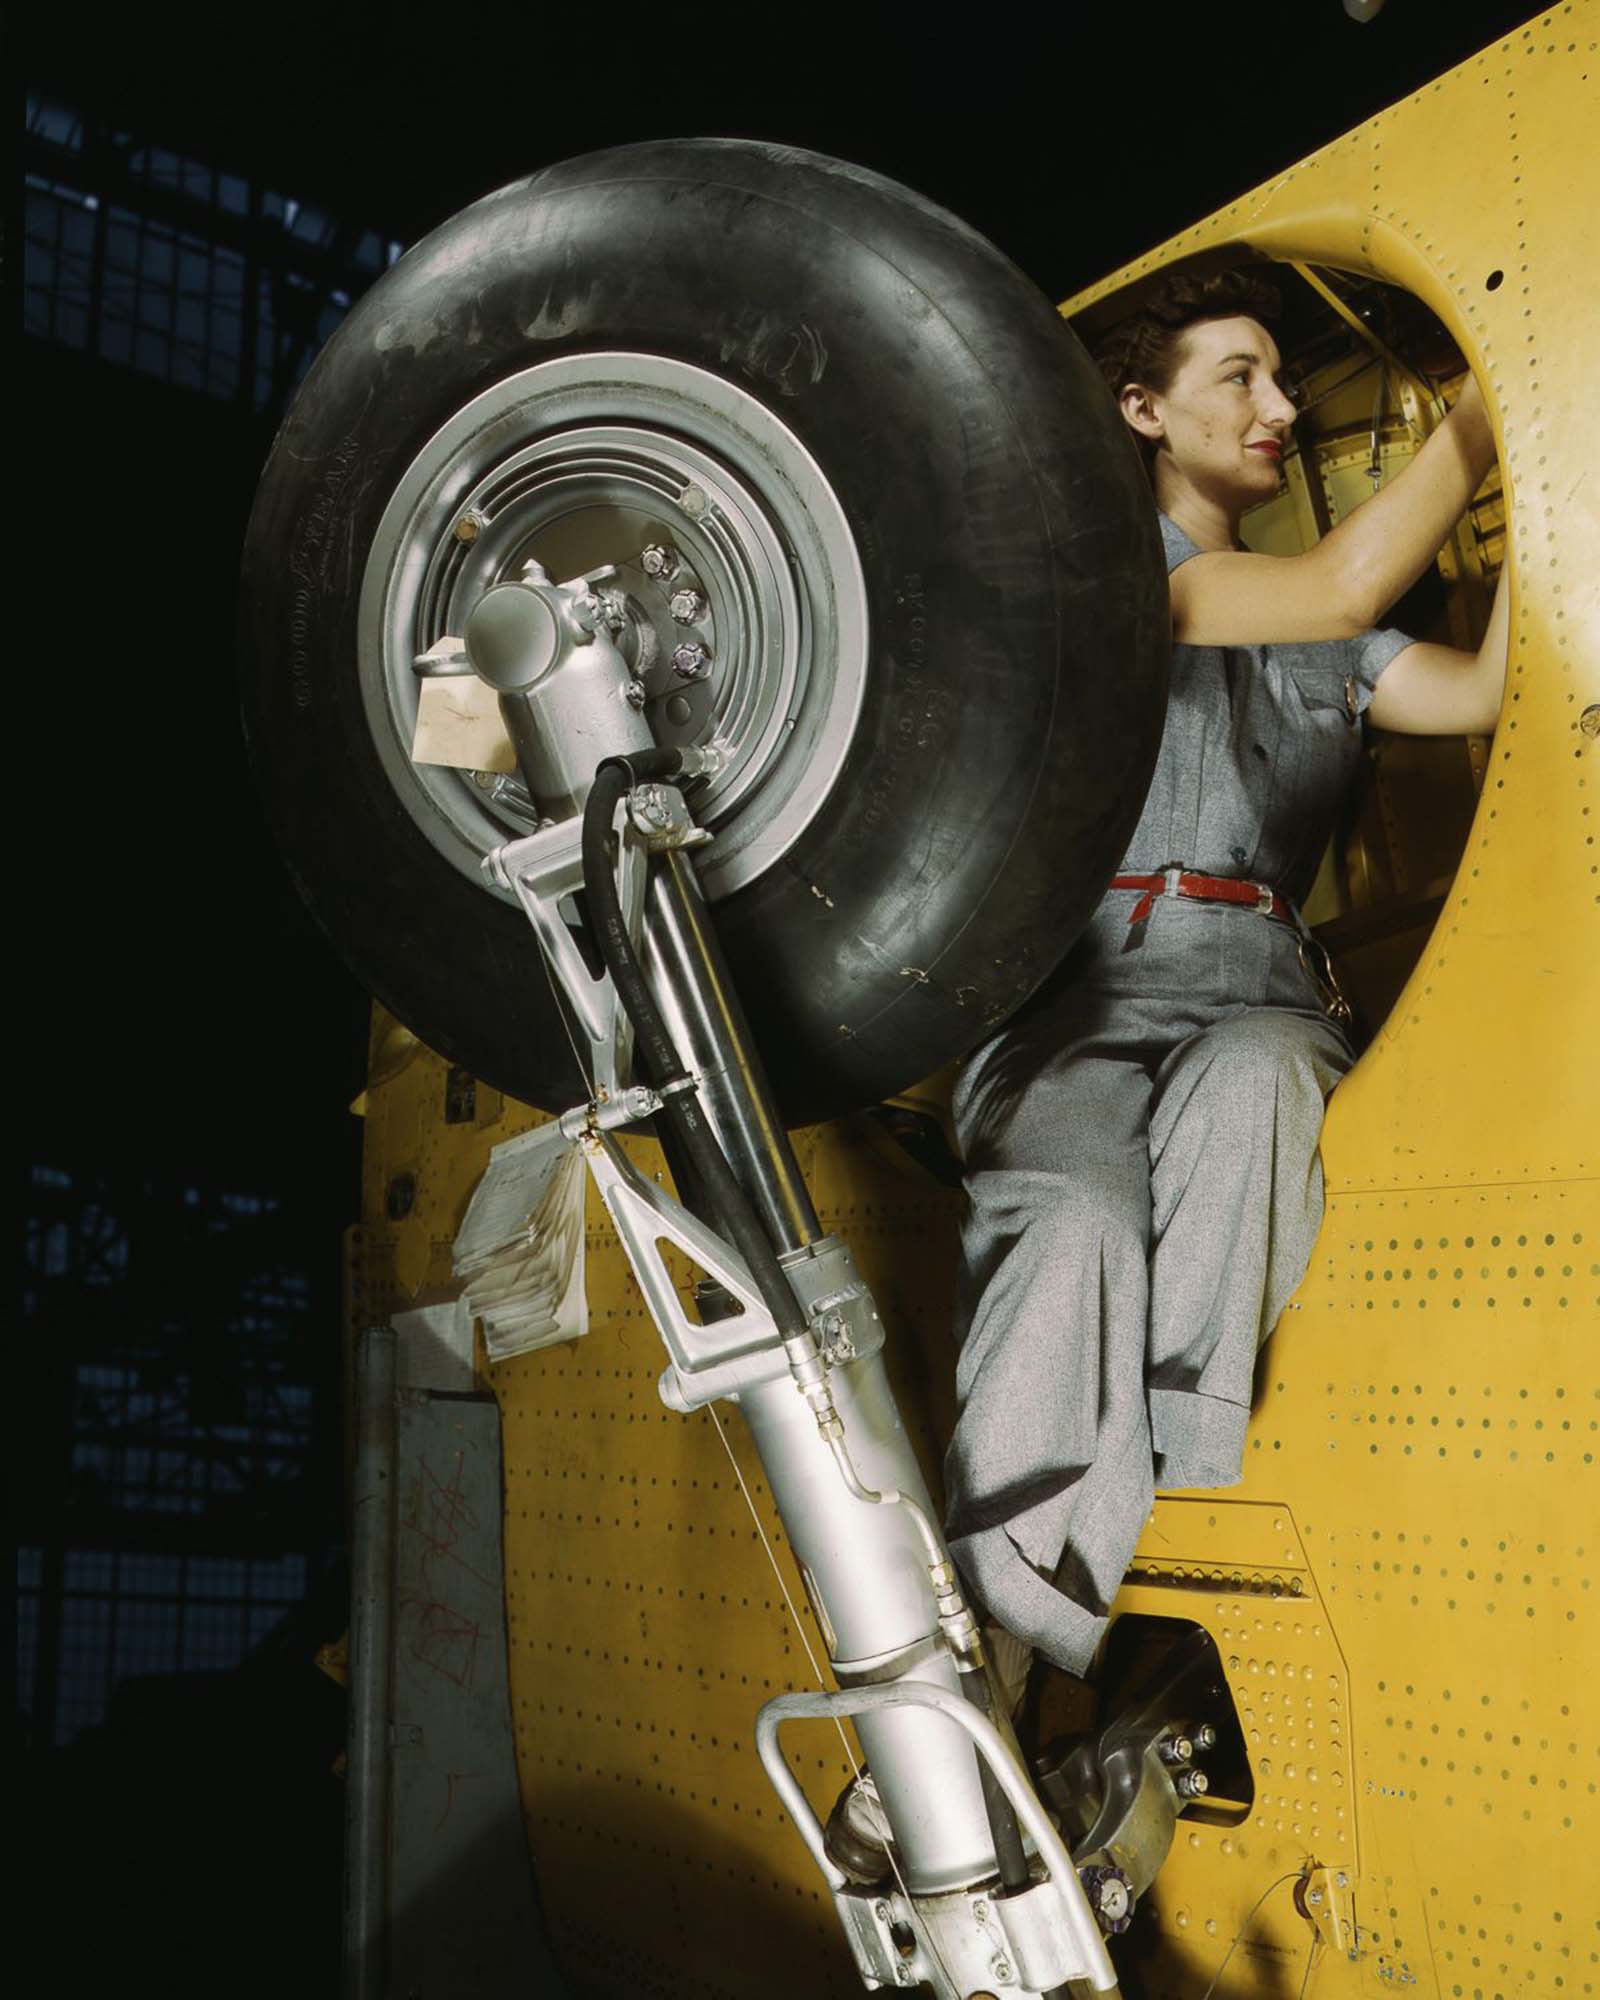 A Vultee Aircraft worker makes adjustments to the wheel well of a “Vengeance” dive bomber before installation of the landing gear at the plant in Nashville, Tennessee, 1943.